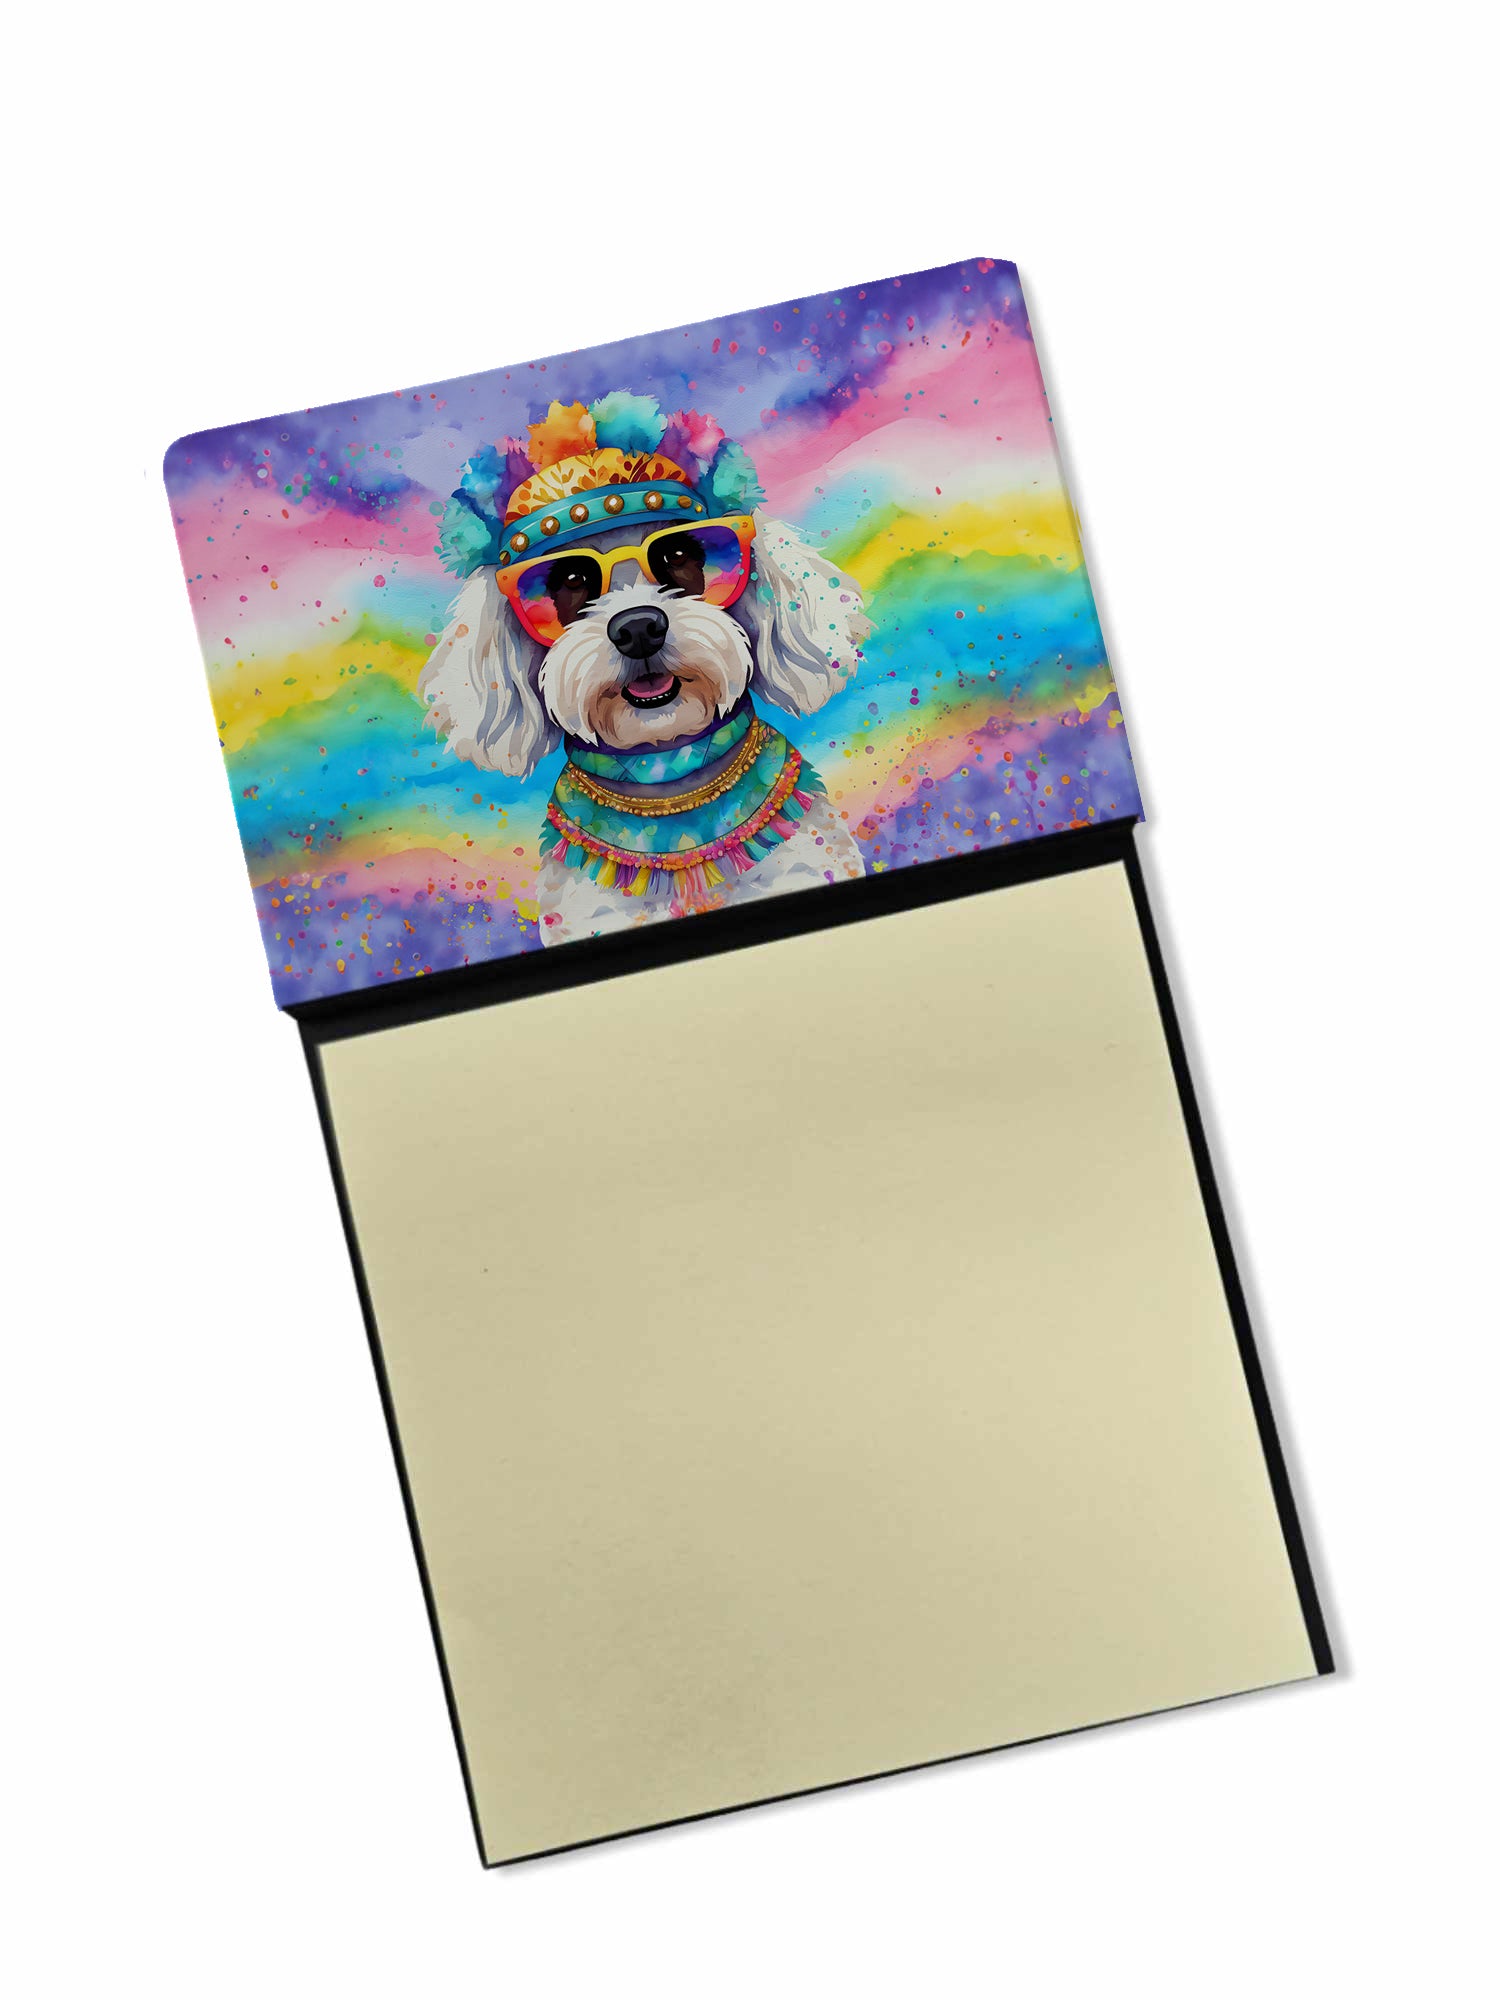 Buy this Bichon Frise Hippie Dawg Sticky Note Holder